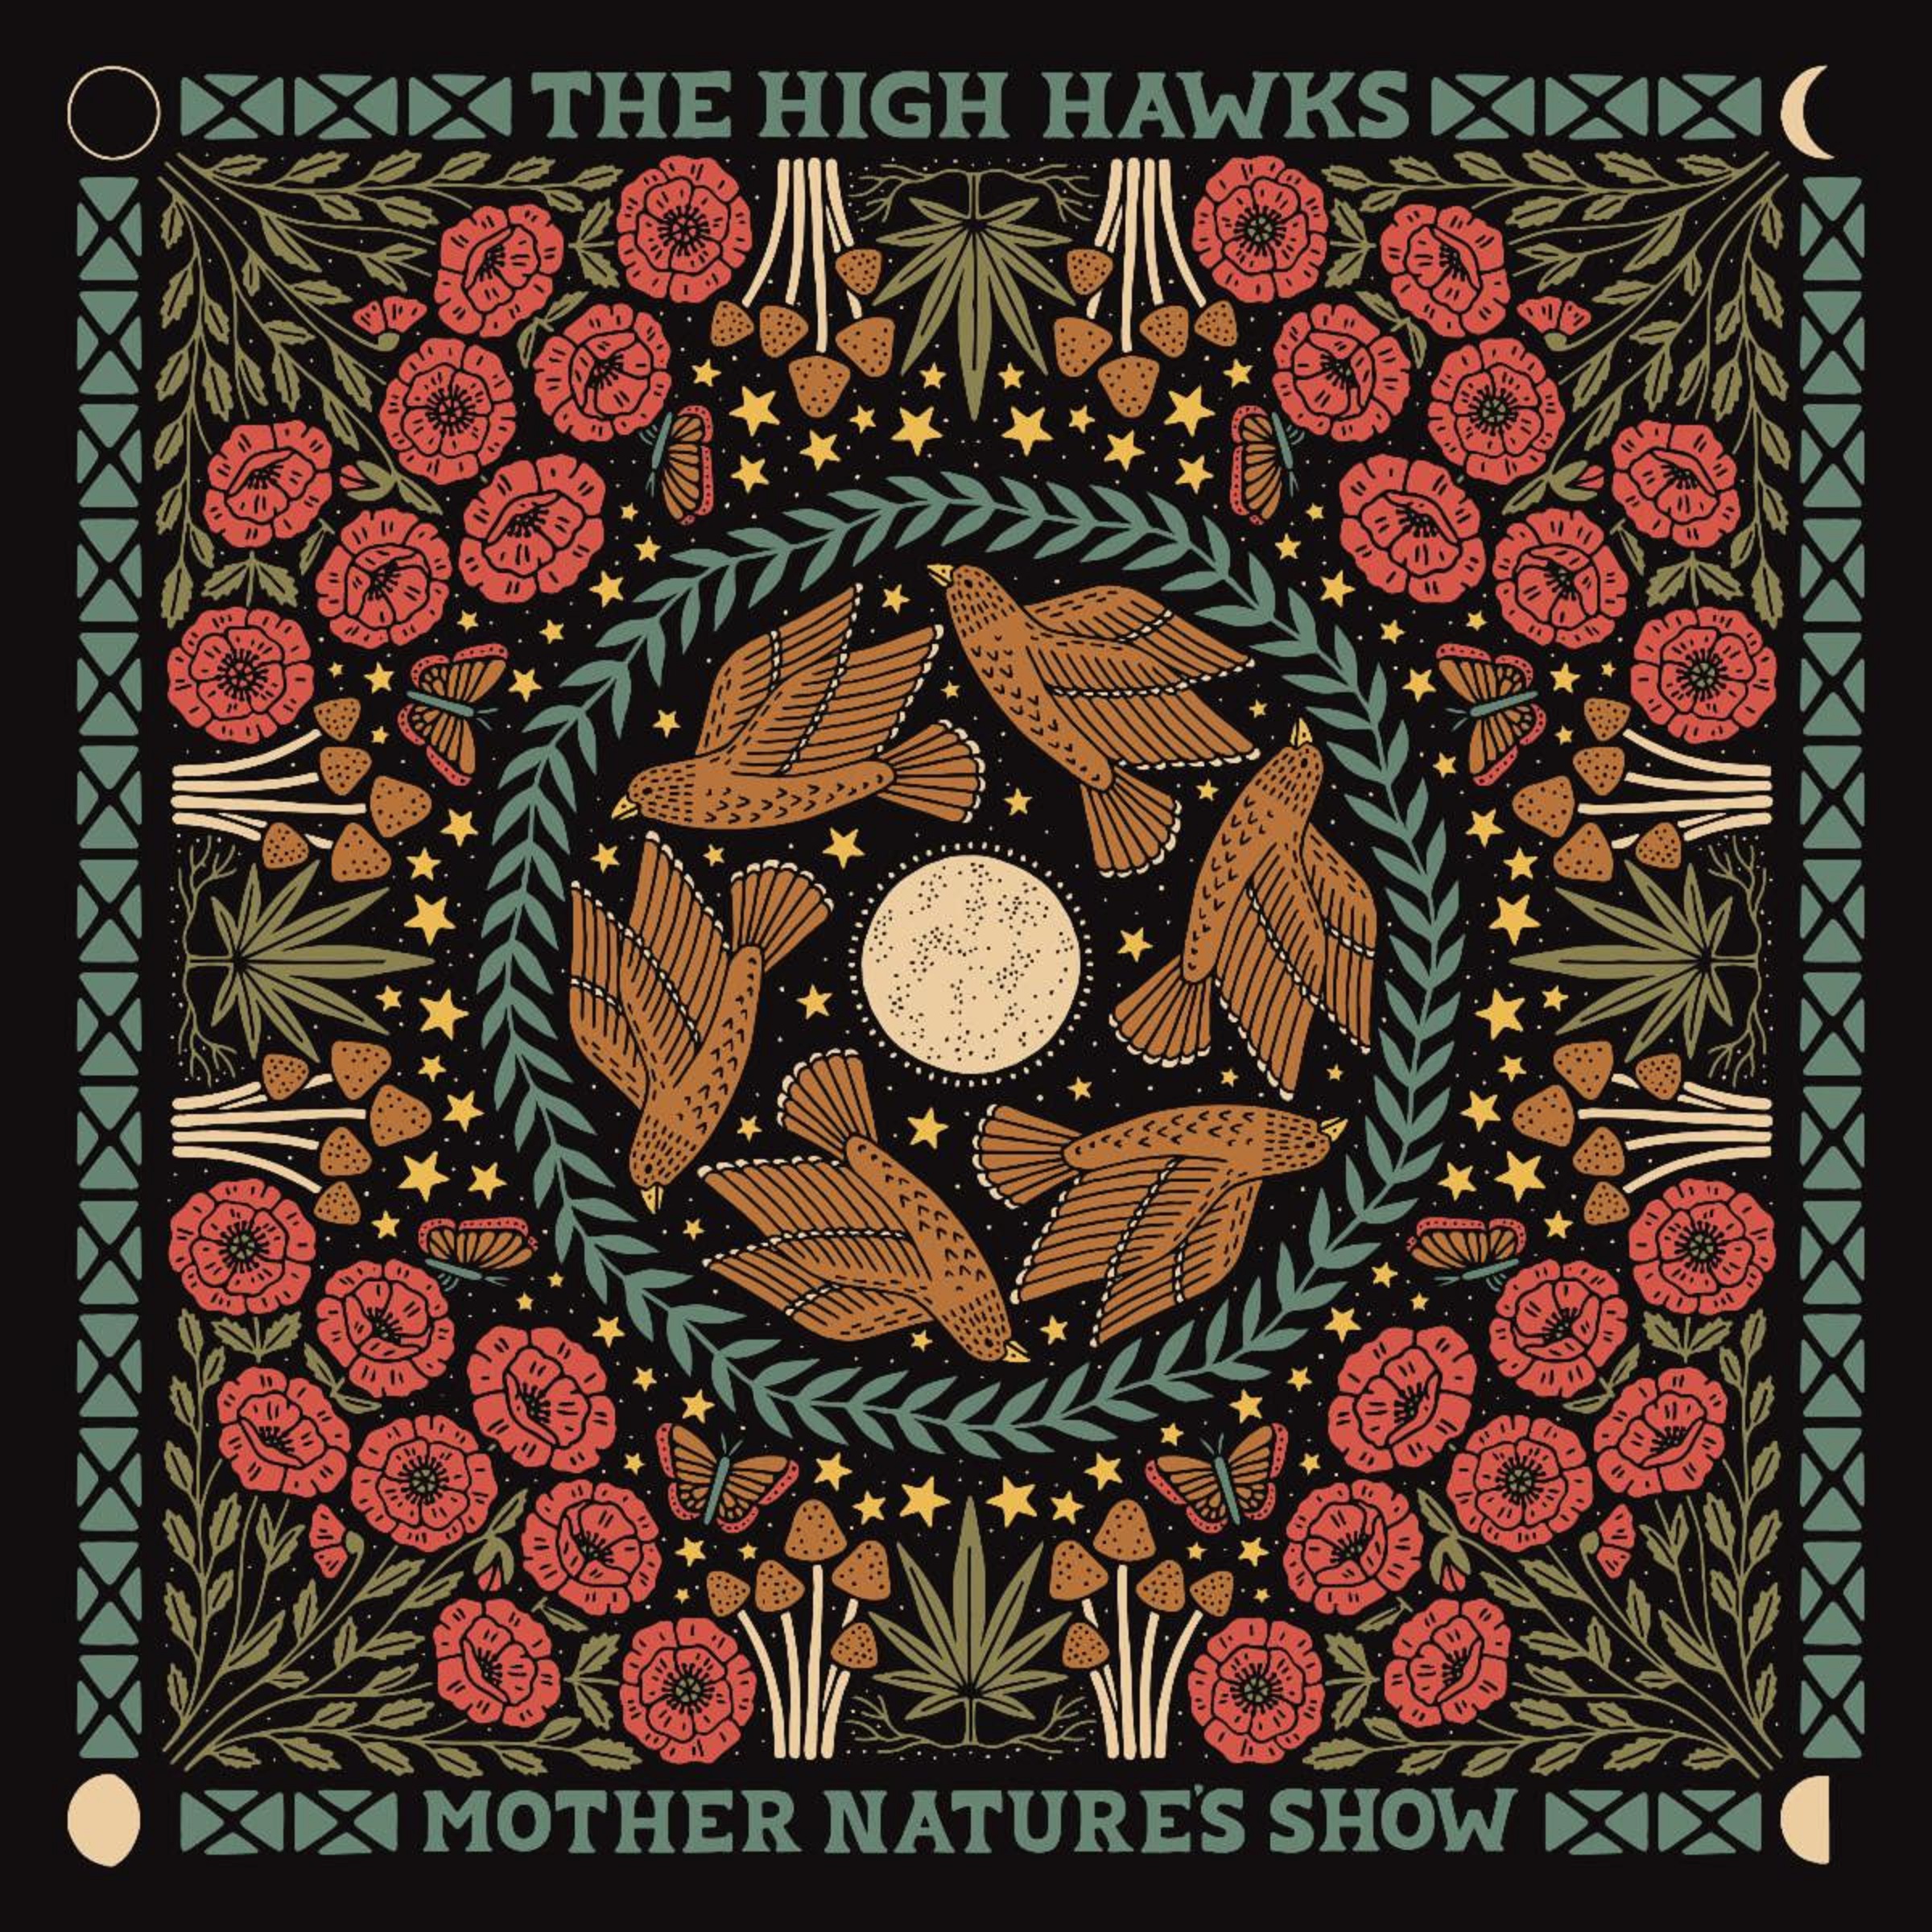 THE HIGH HAWKS return with "Mother Nature's Show"